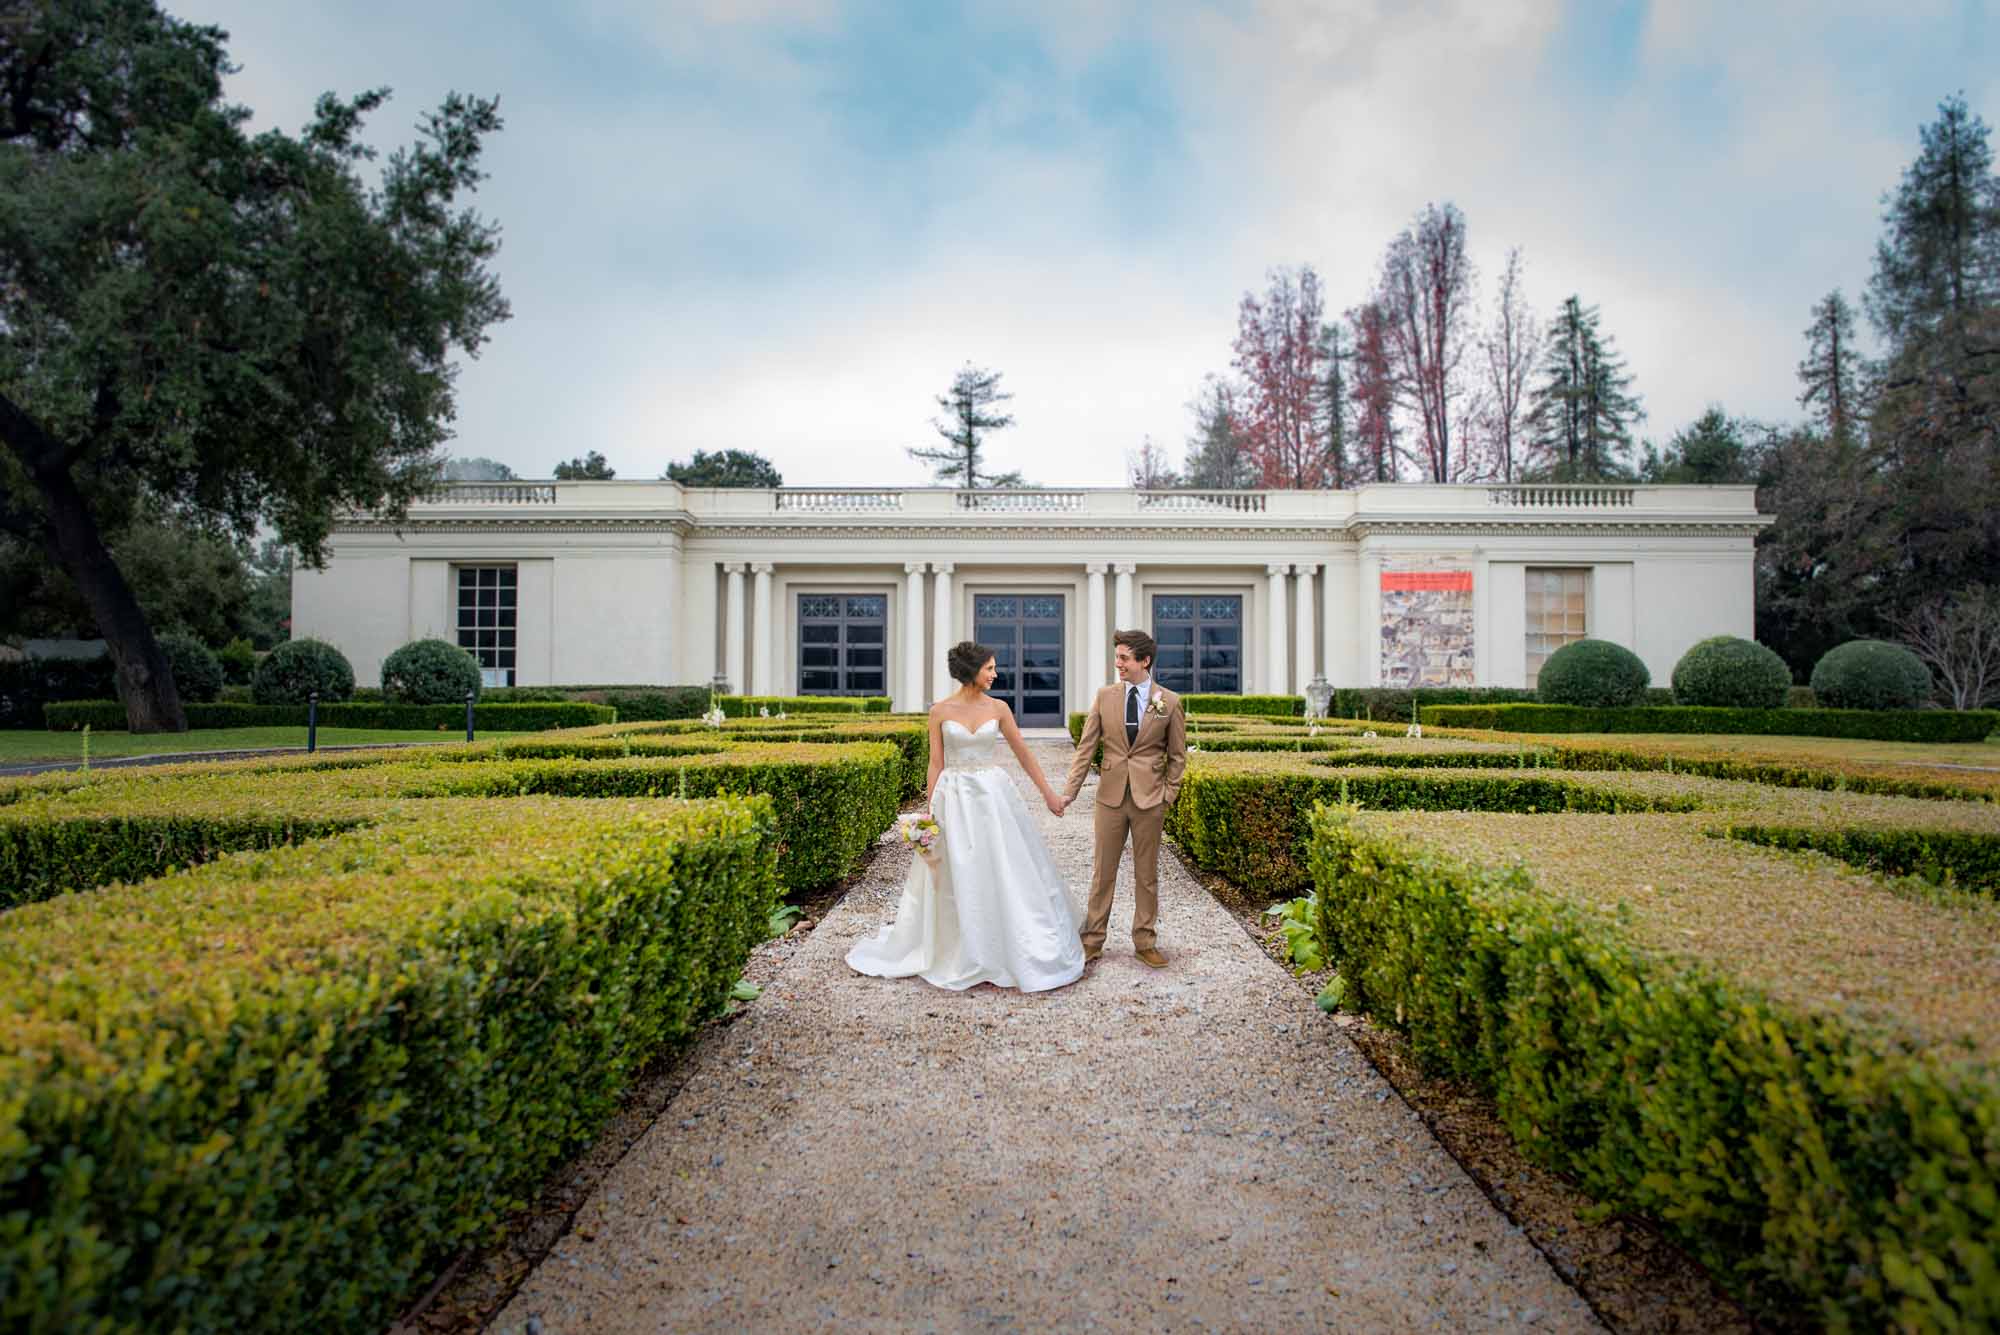 Couple holding hands at Huntington Library and gardens wedding venue